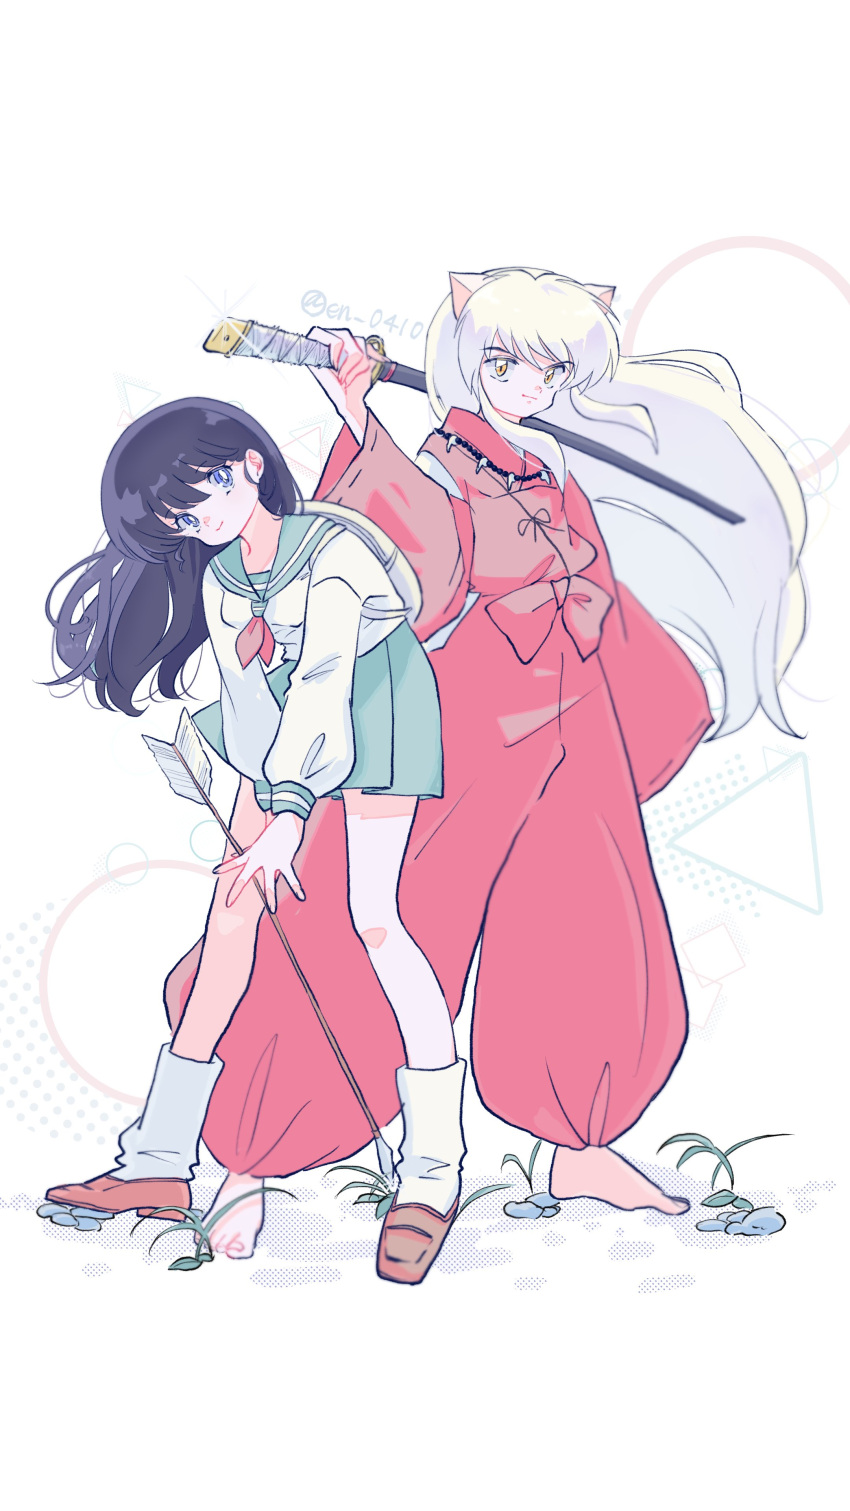 2girls absurdres arrow_(projectile) artist_name barefoot black_hair blue_eyes character_request circle en_0410 feet green_skirt highres inuyasha japanese_clothes kimono looking_at_viewer multiple_girls red_kimono school_uniform shirt skirt smile square sword triangle weapon white_background white_hair white_shirt yellow_eyes